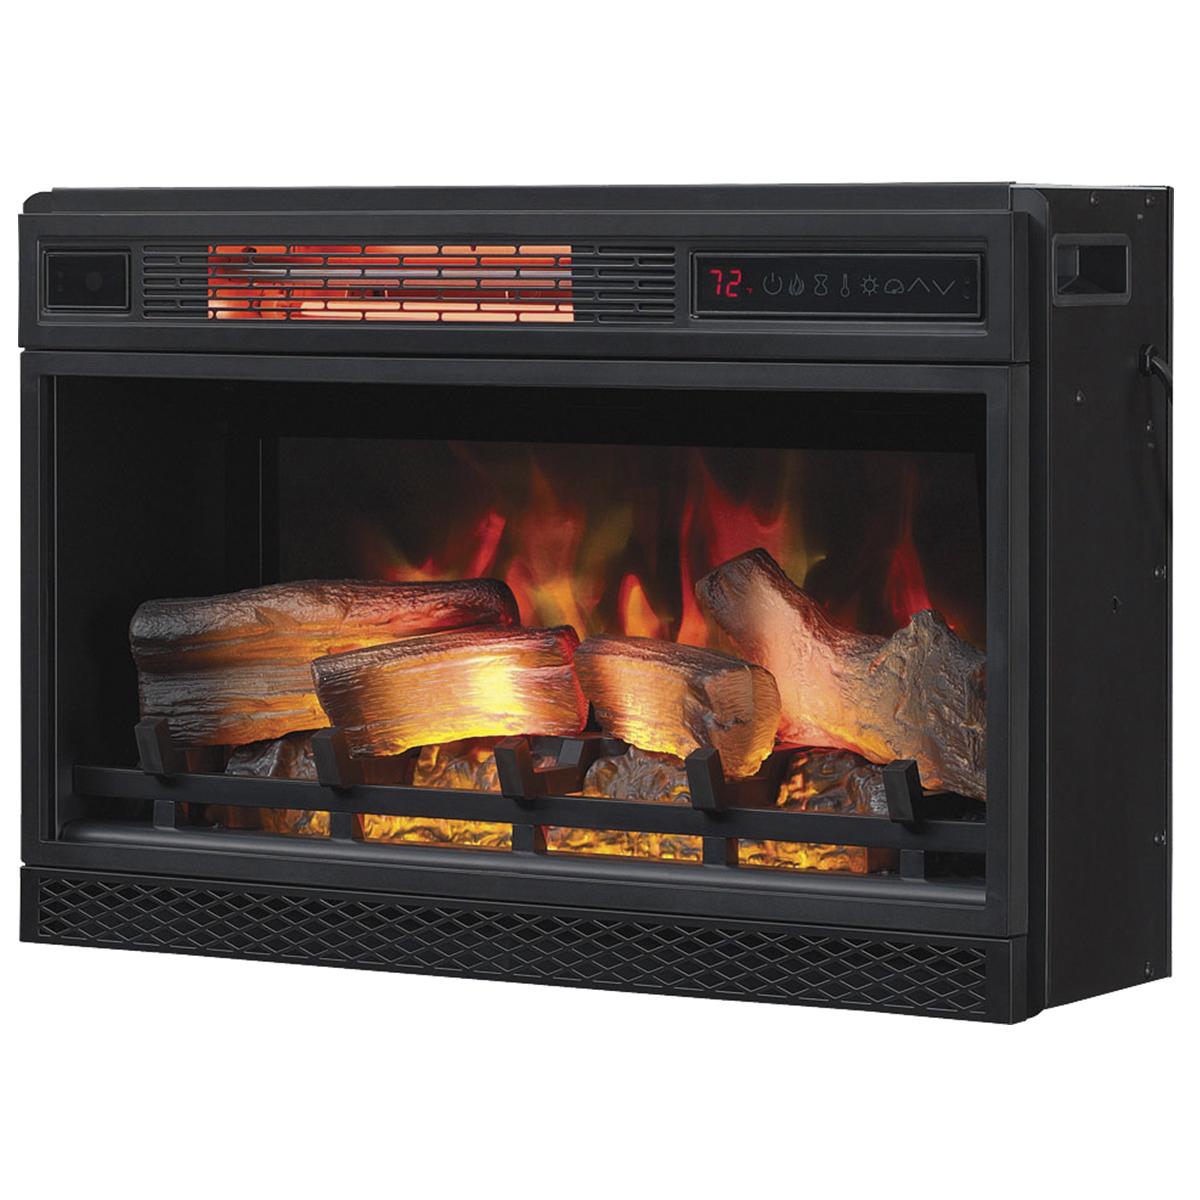 Black Electric Fireplace with Mantel Awesome Fabio Flames Greatlin 3 Piece Fireplace Entertainment Wall